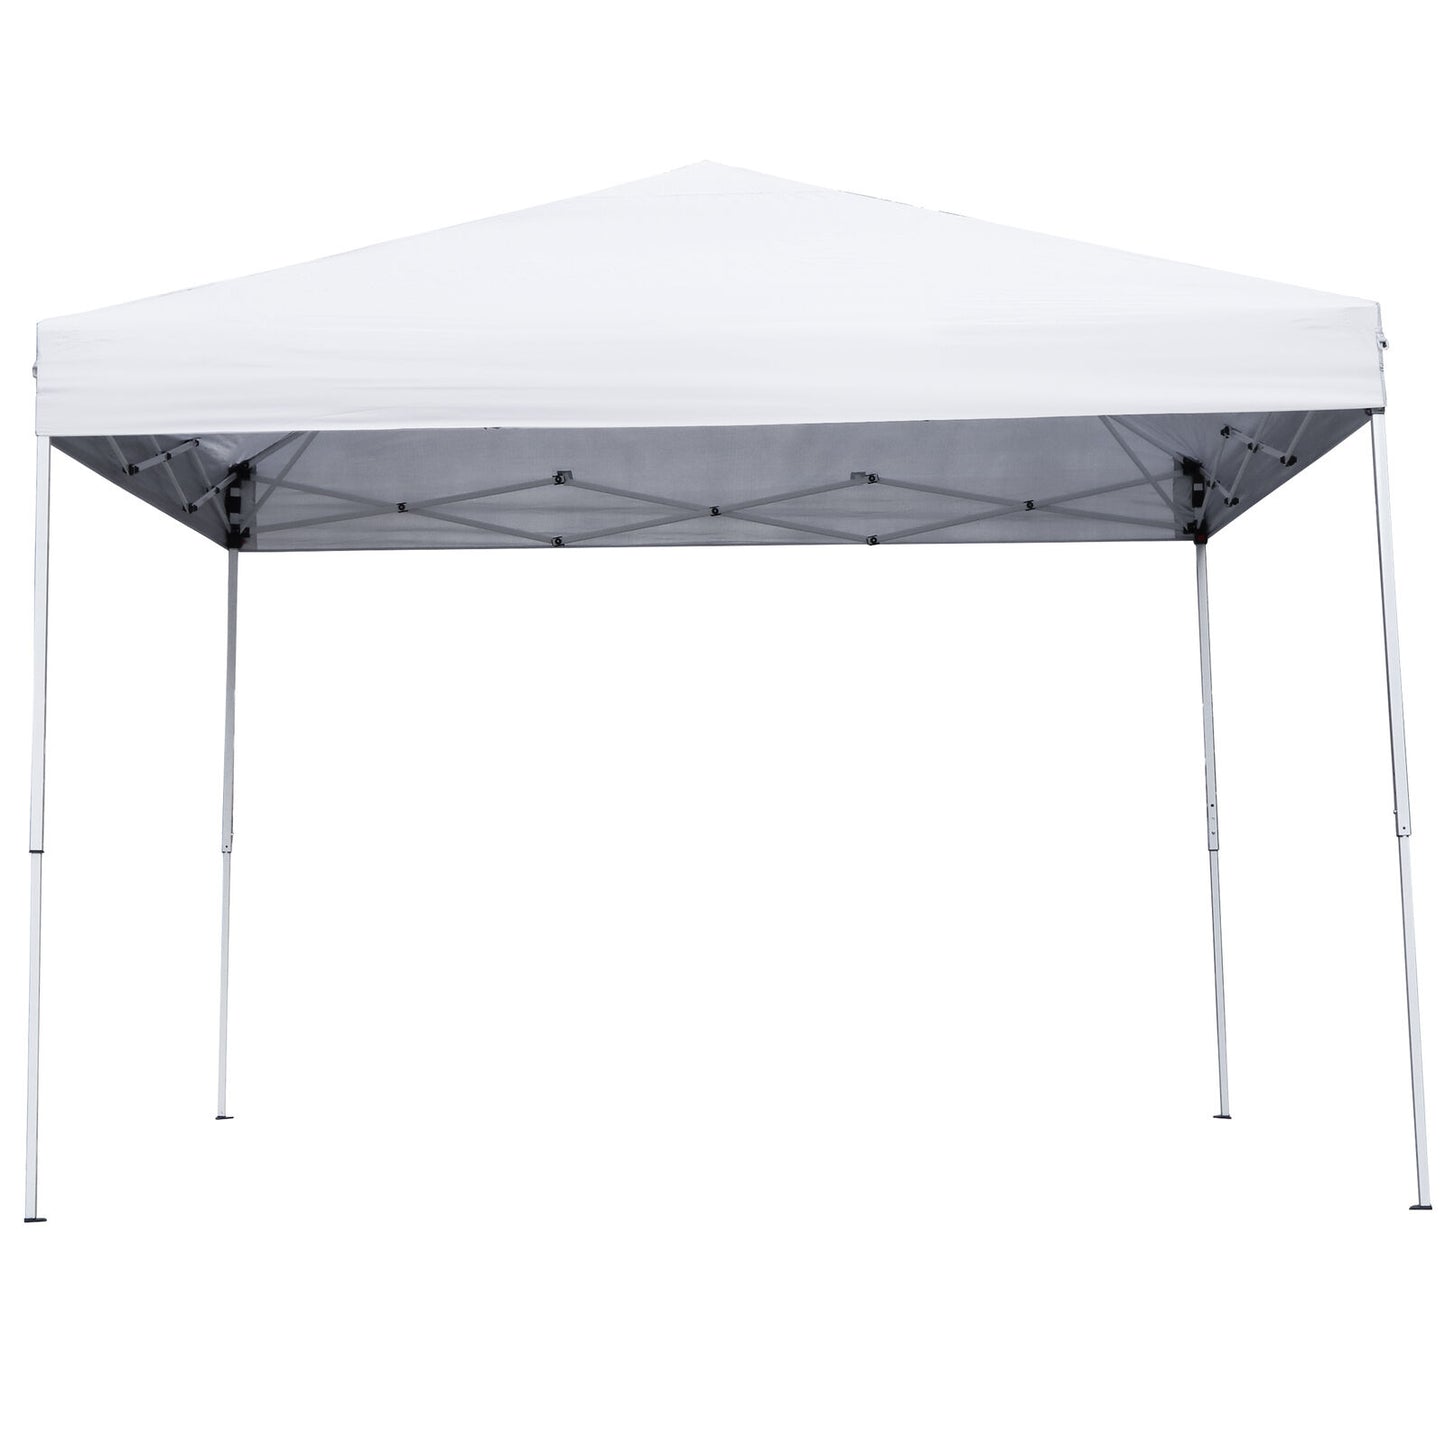 10 x 10 ft Pop Up Foldable Canopy Tent PreAssembled Lightweight Waterproof White